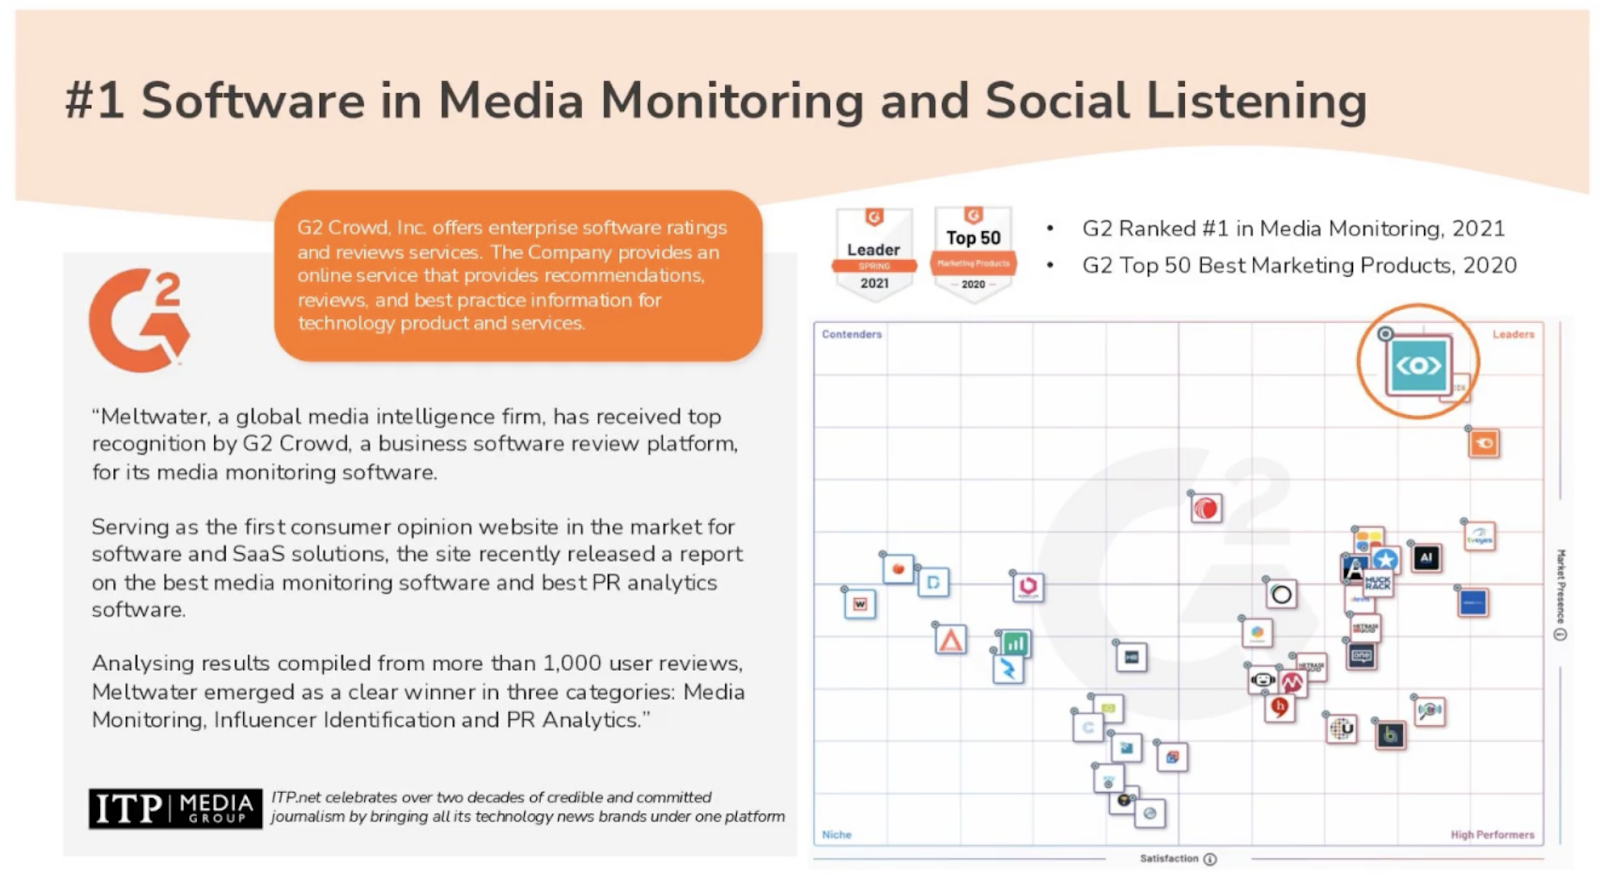 #1 Software in media montoring and social listening